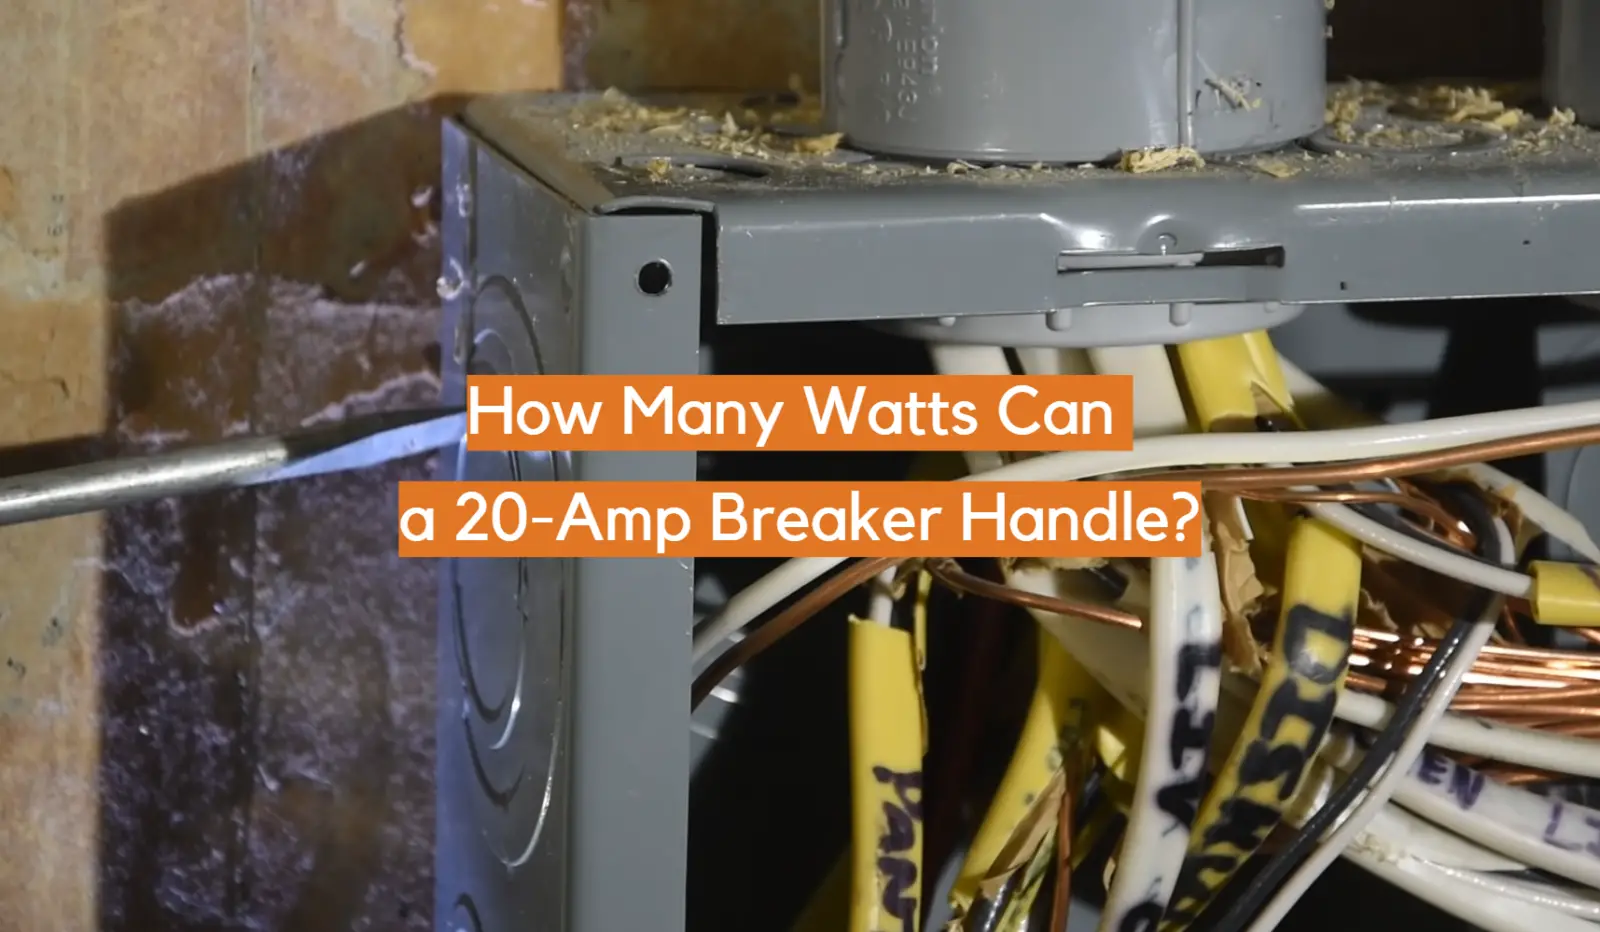 How Many Watts Can a 20-Amp Breaker Handle?